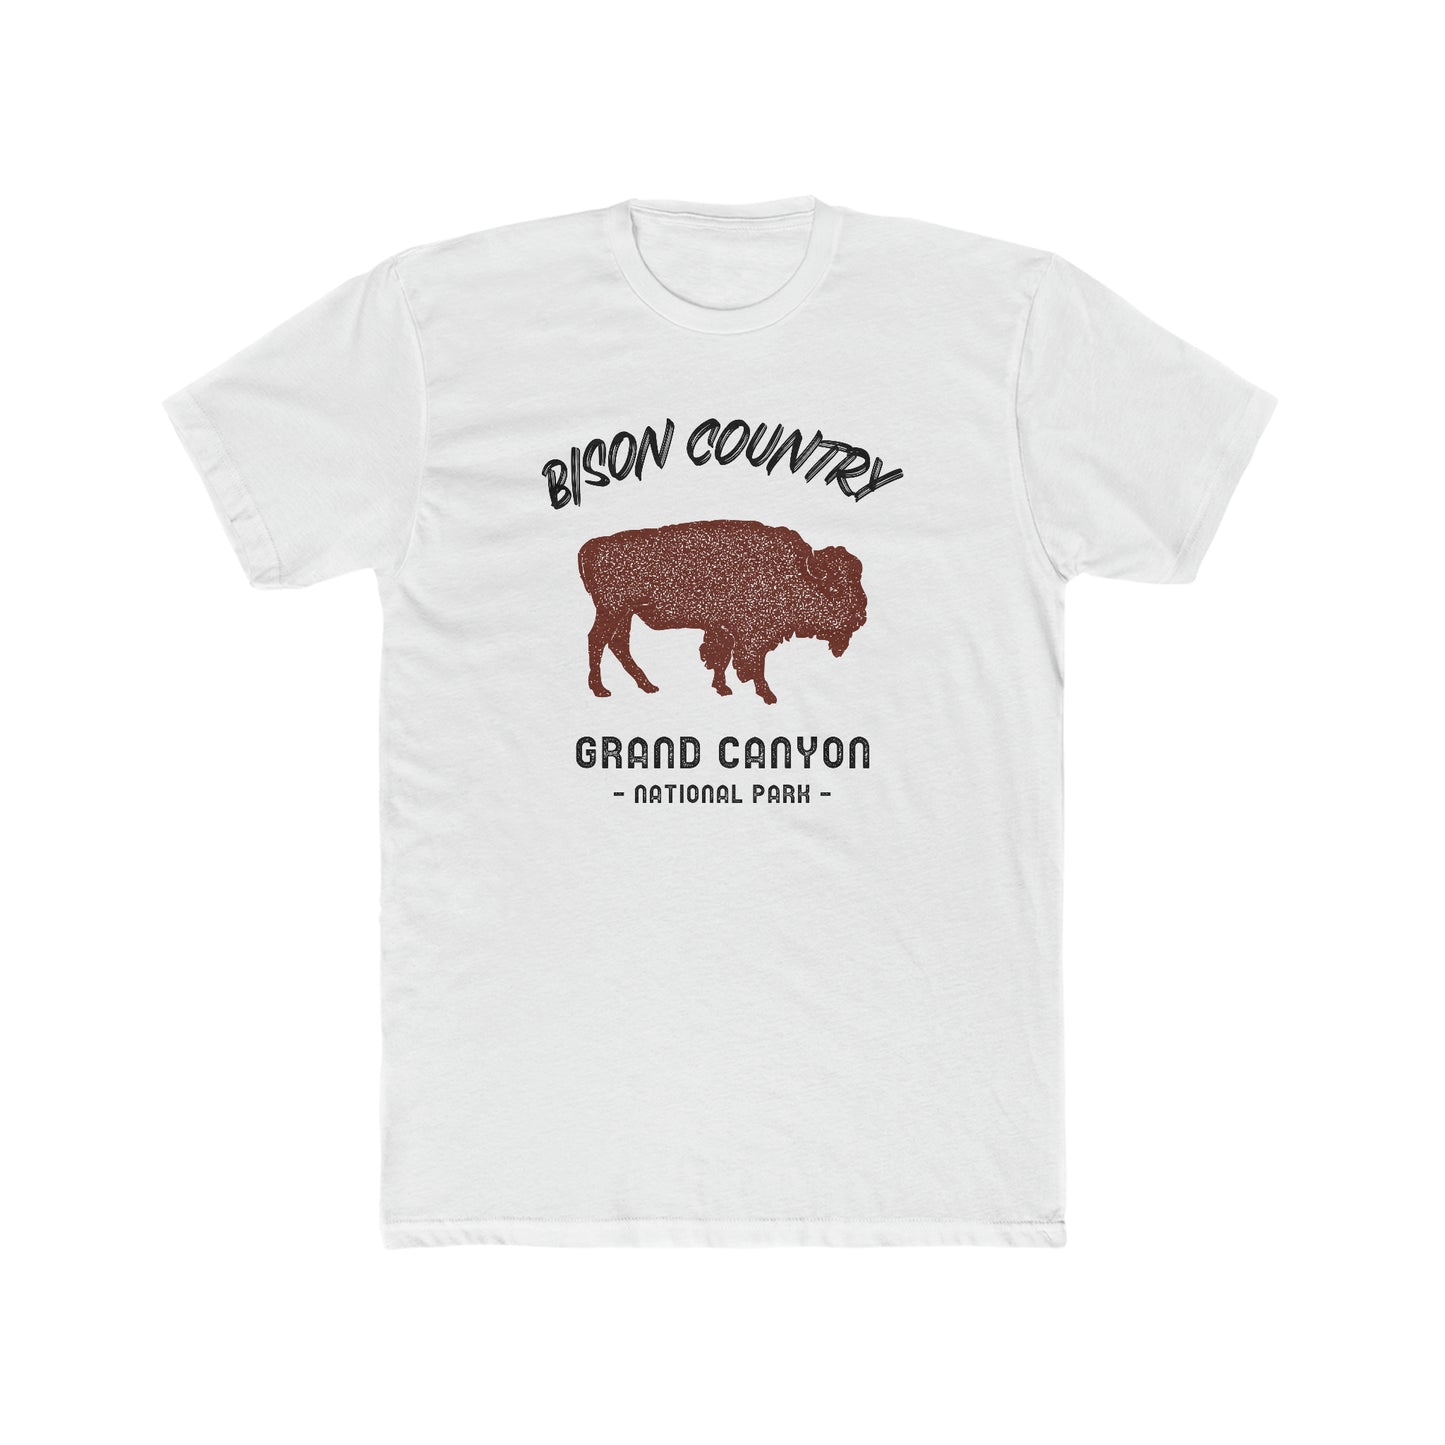 Grand Canyon National Park T-Shirt - Bison Country